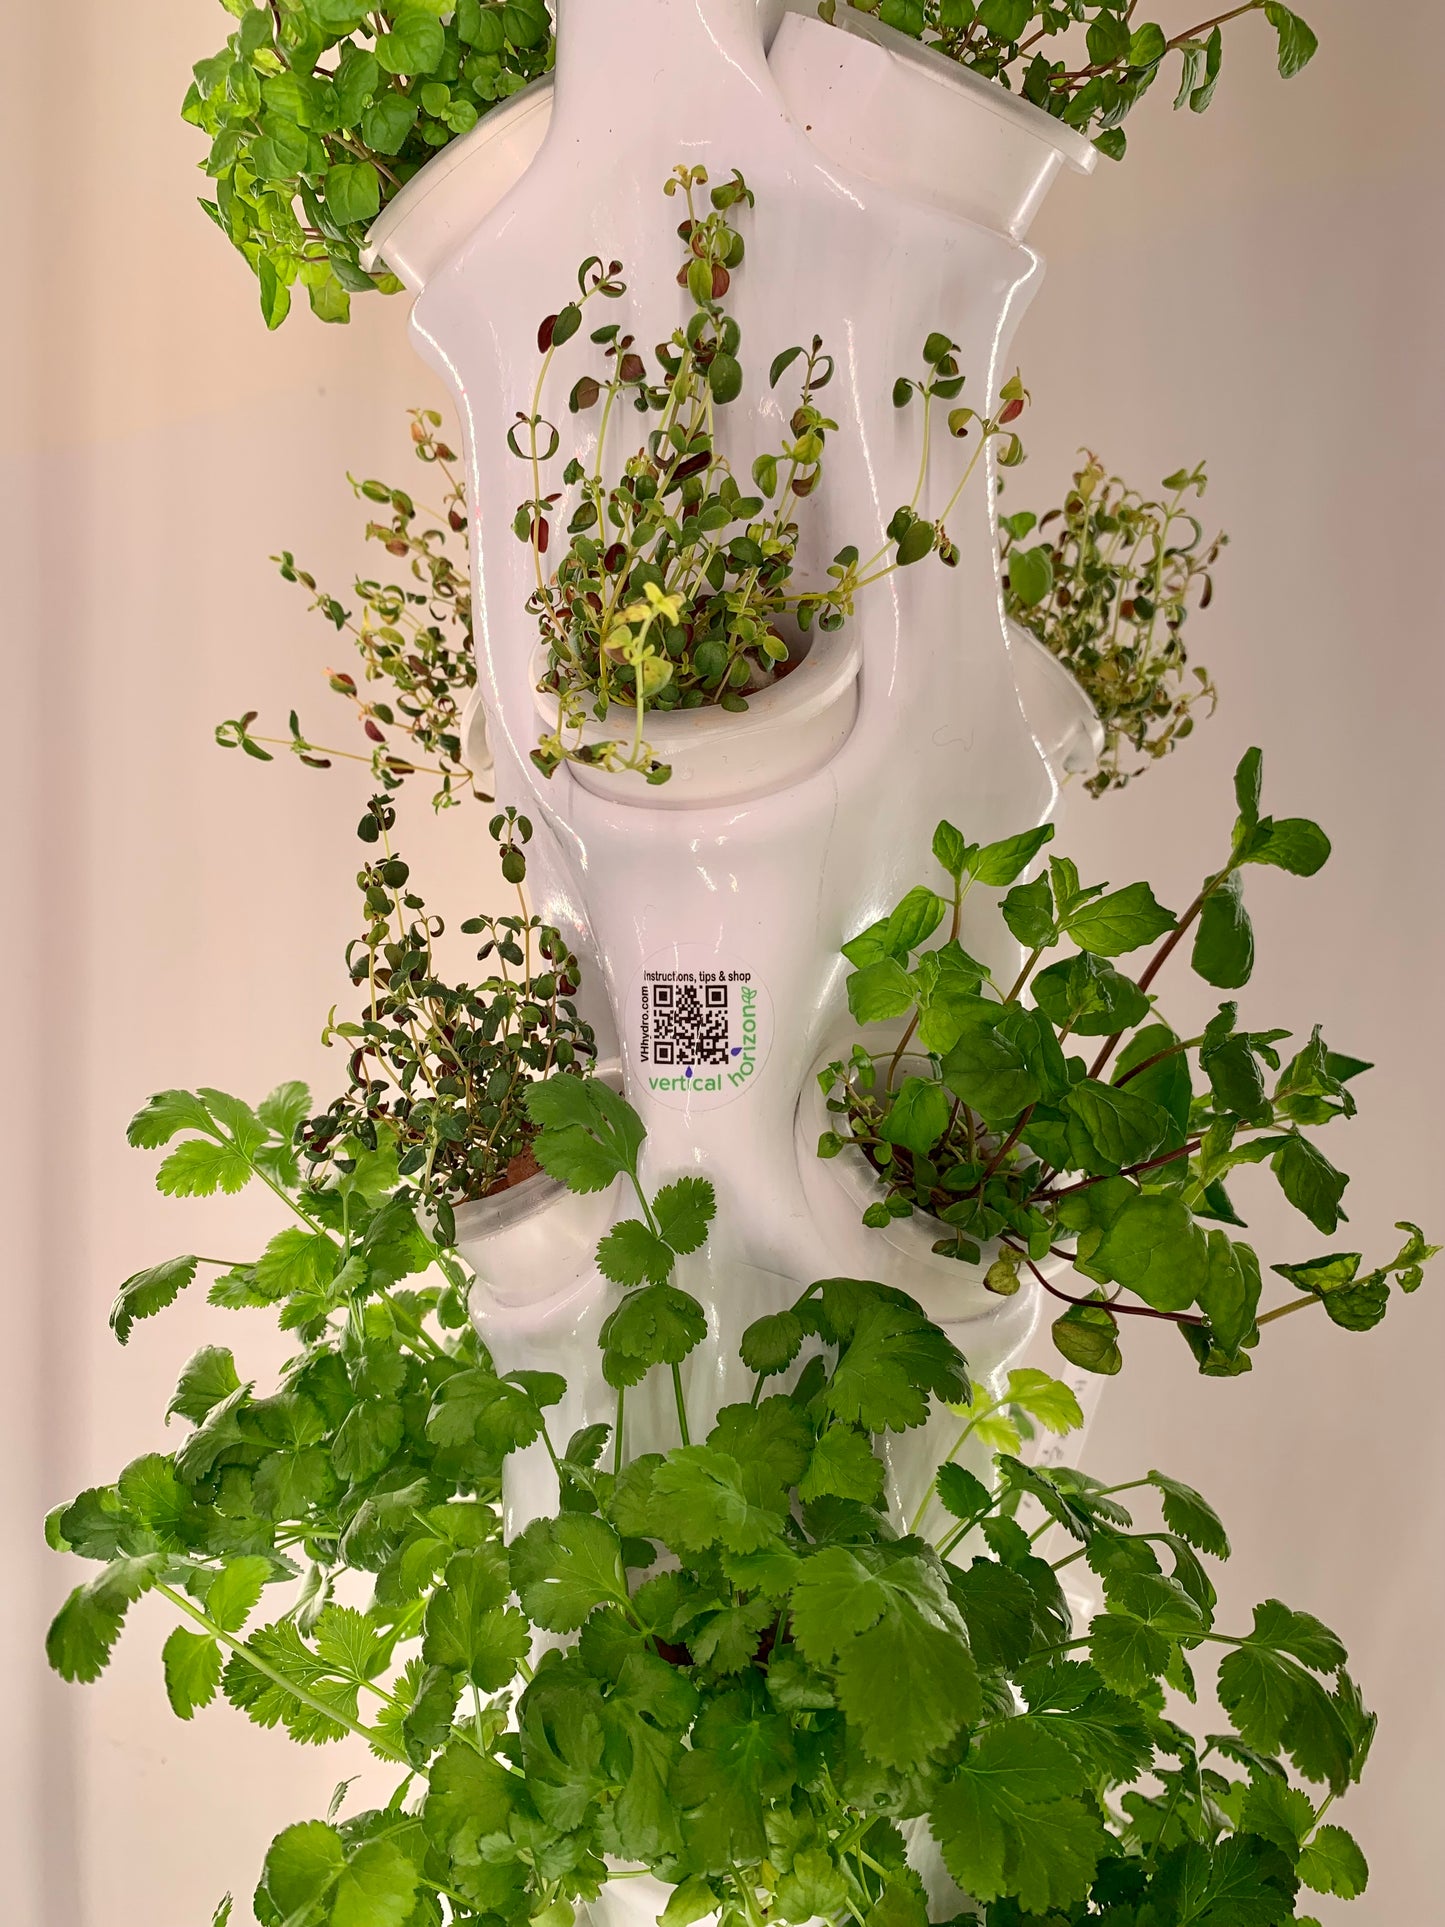 Vertical Hydroponic Tower Self-Watering Growing System (for 42 plants, choice of colours)